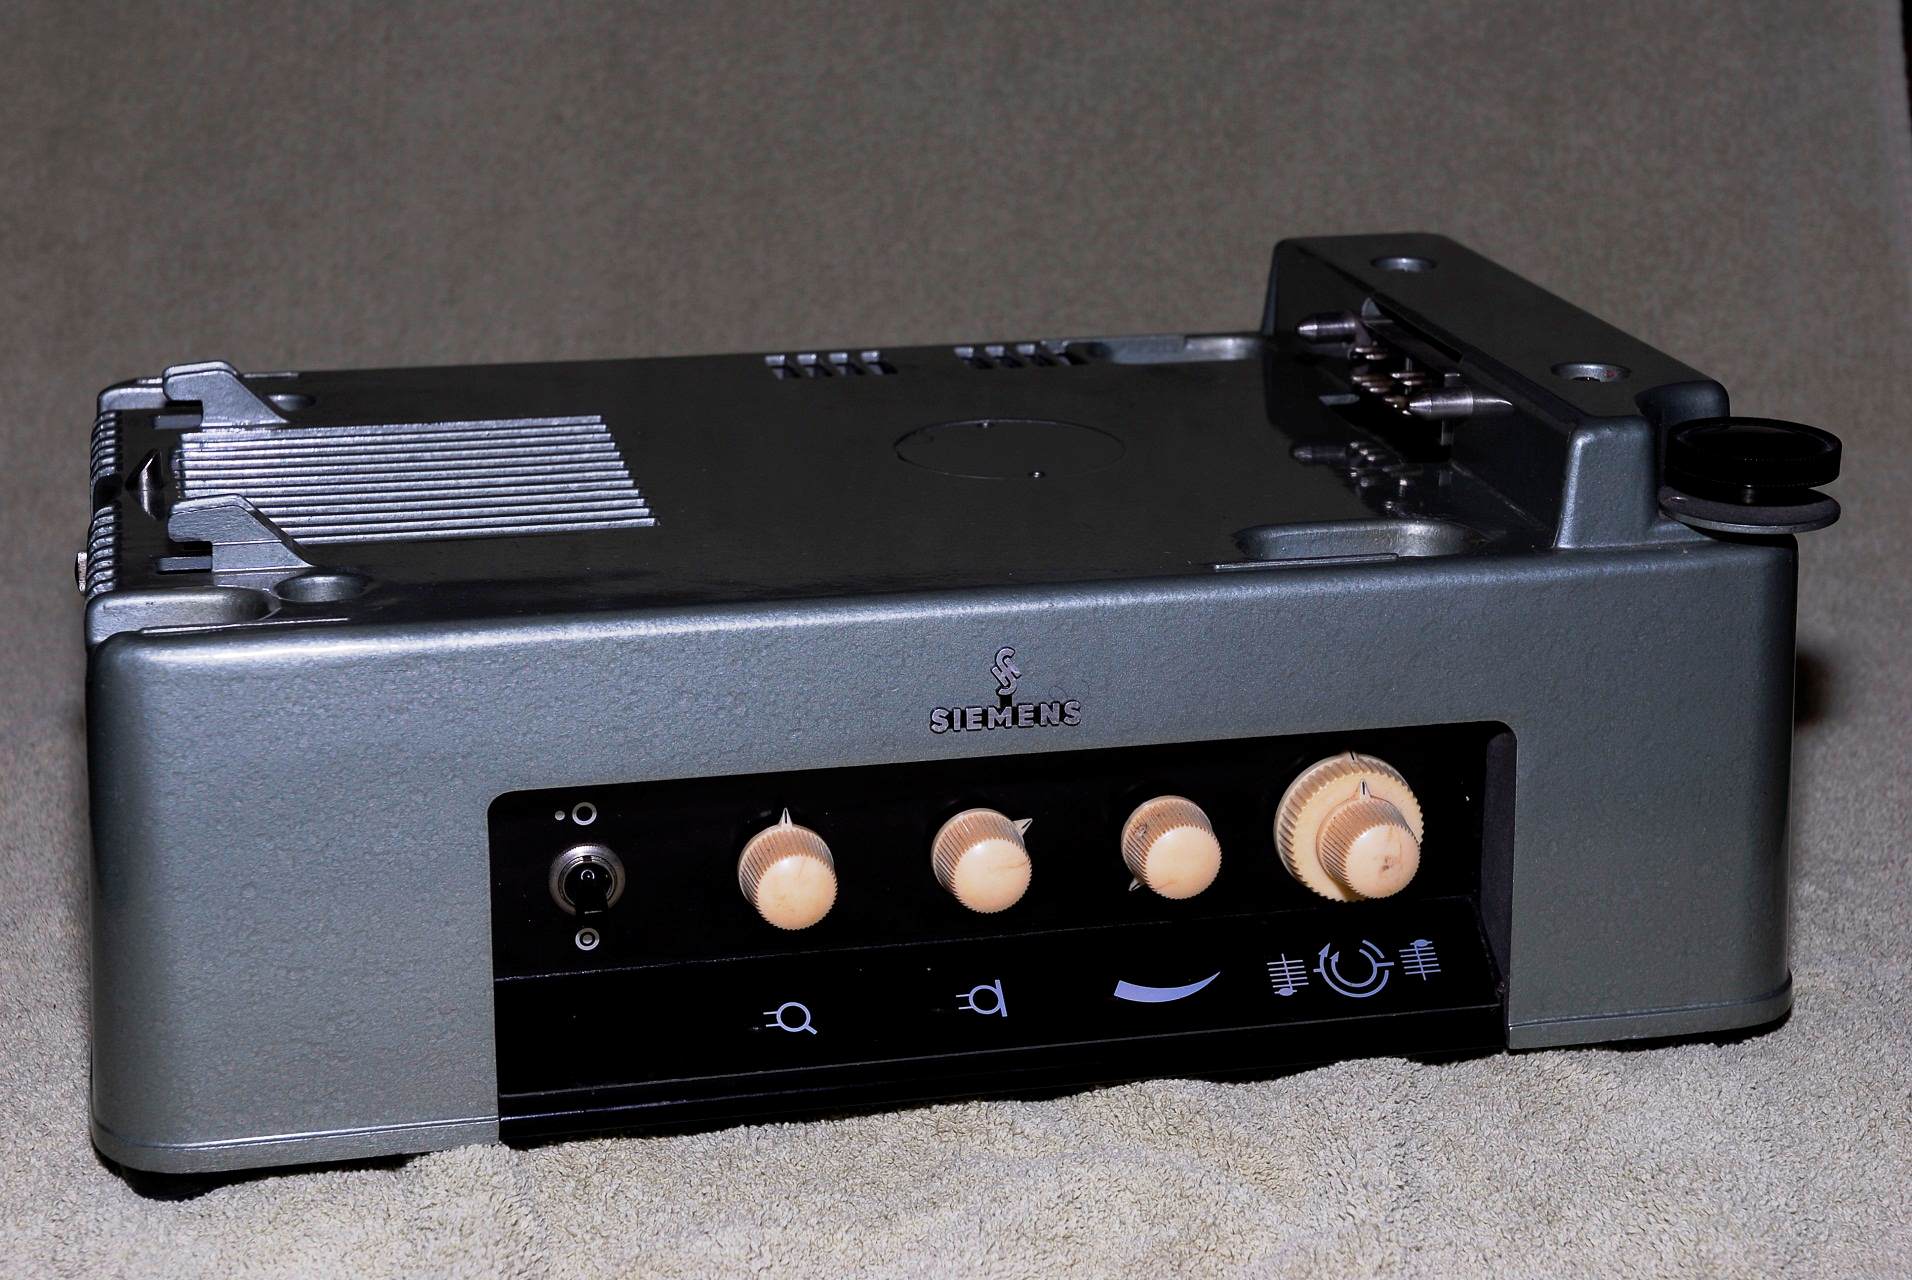 Siemens 2000 green projector amp Sf V. 6.6 with EL95 tubes